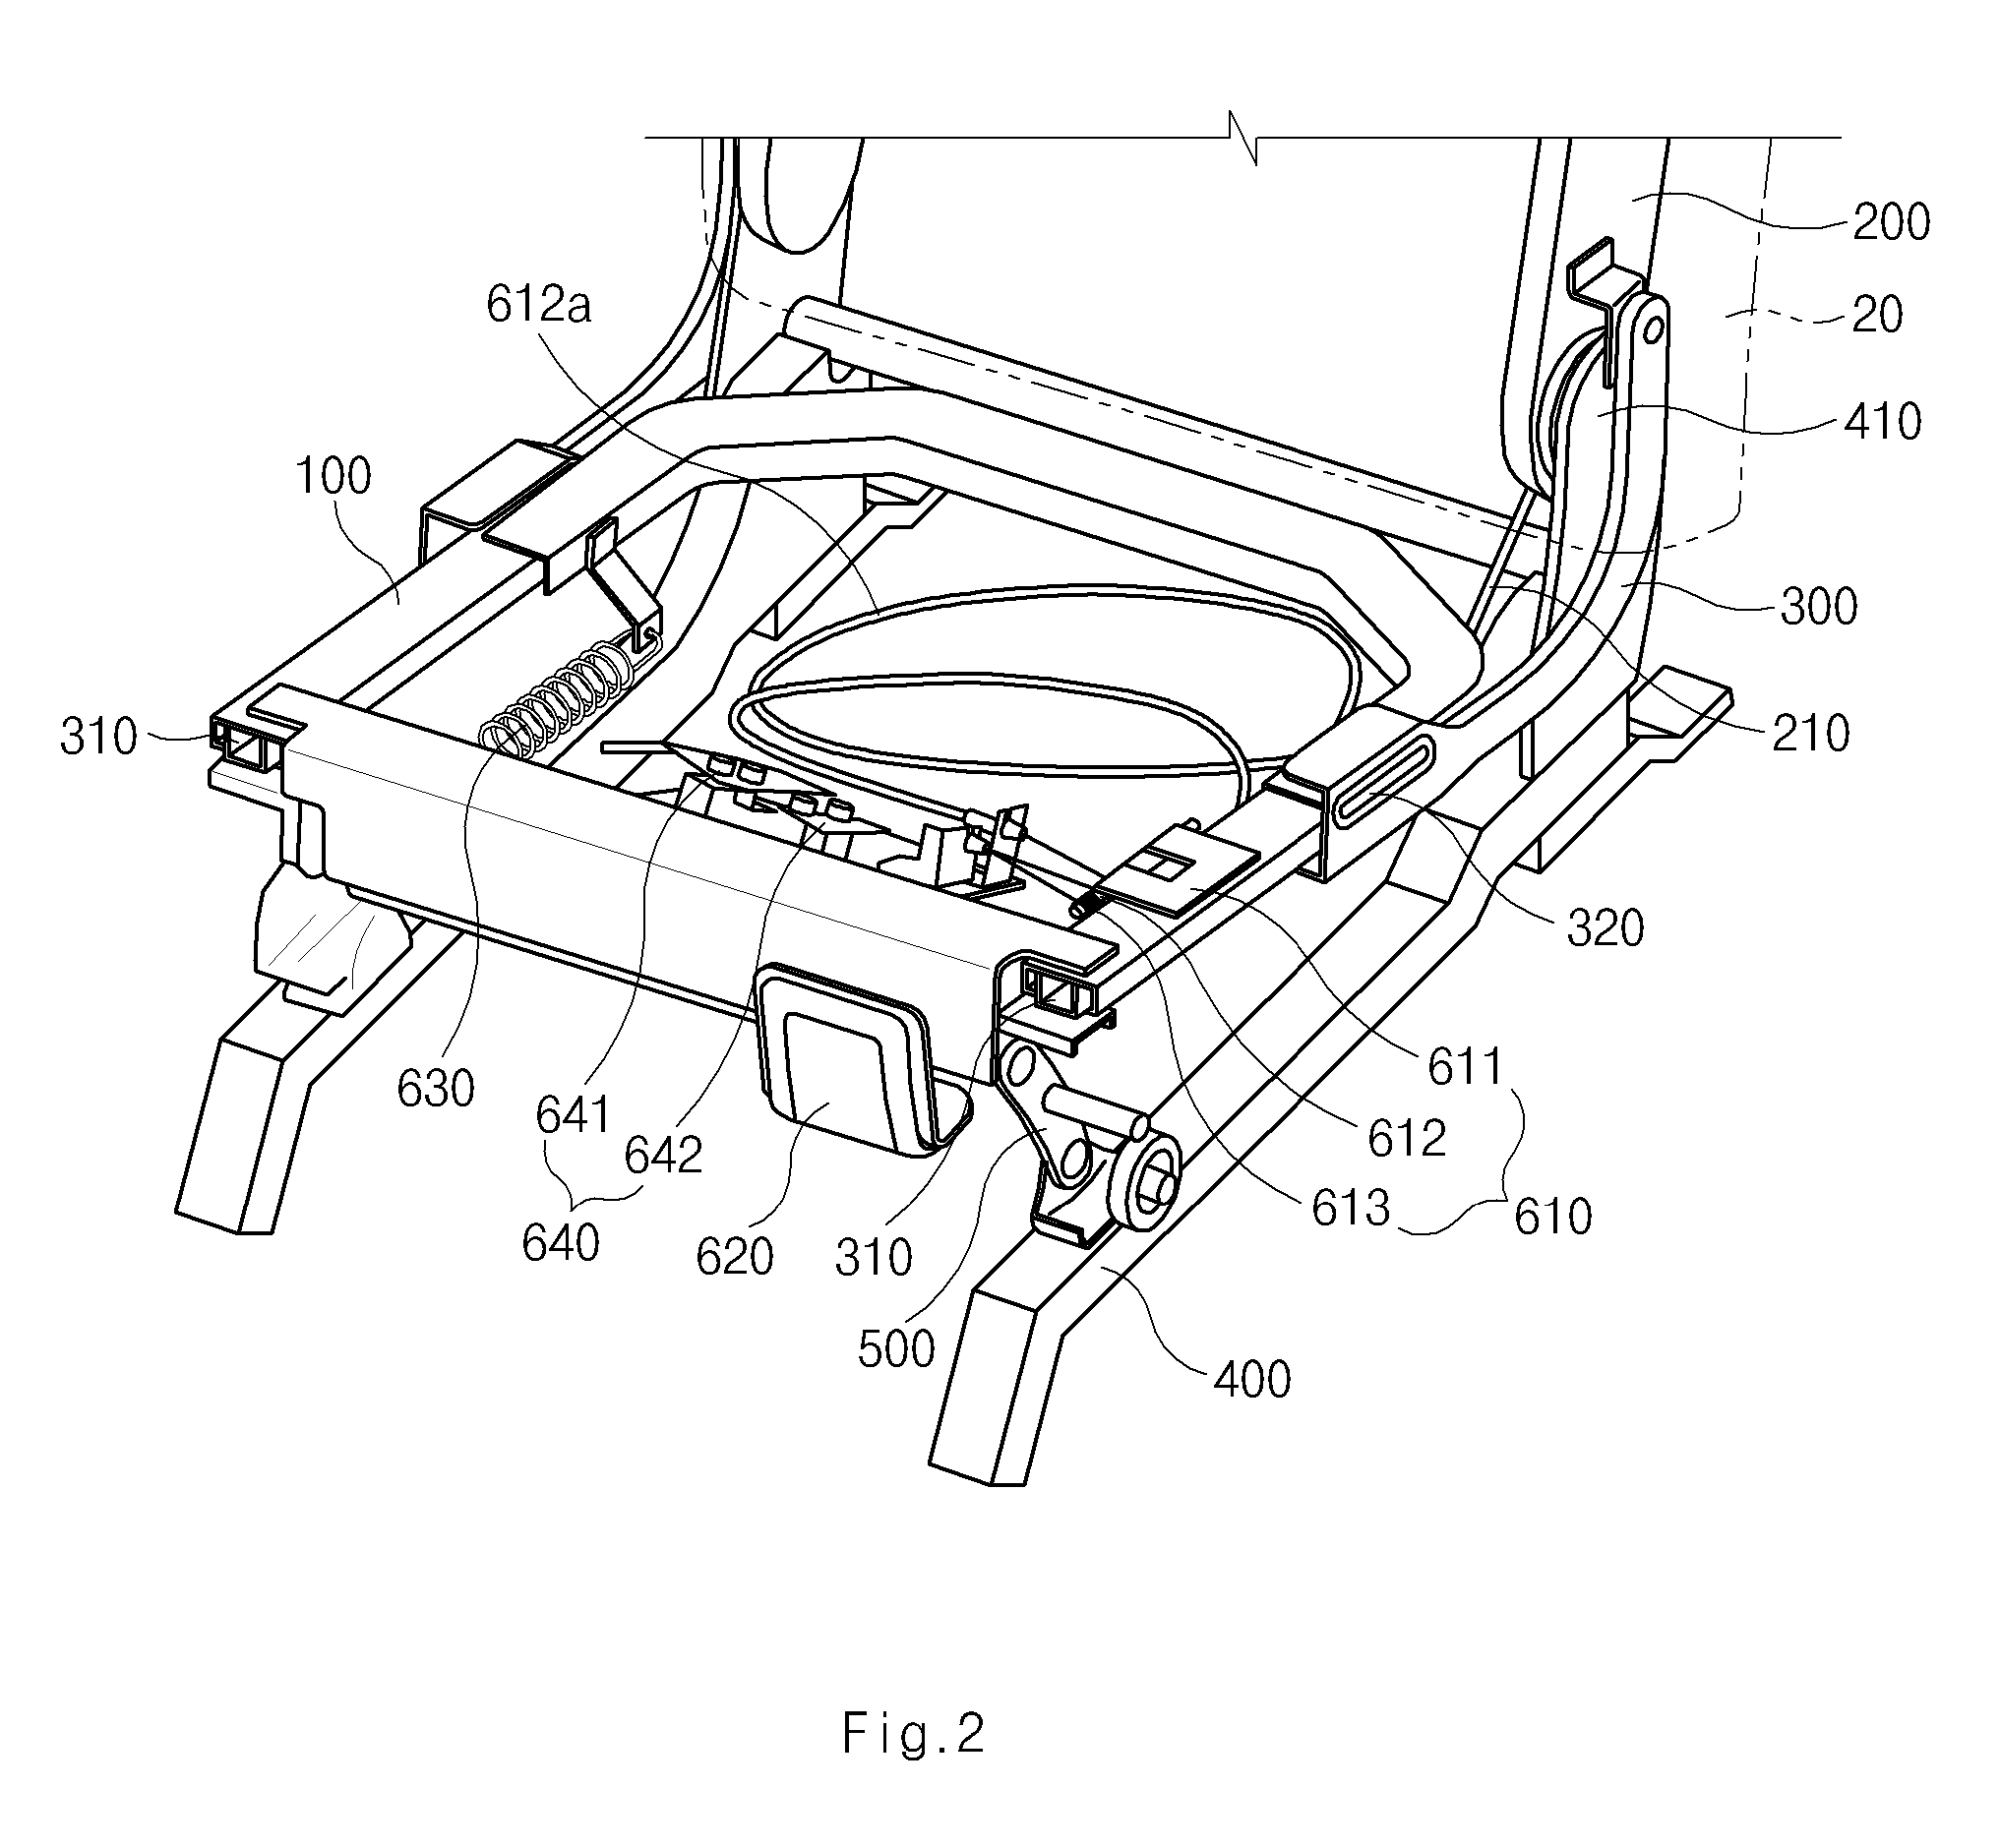 Fold-and dive structure for vehicle seat